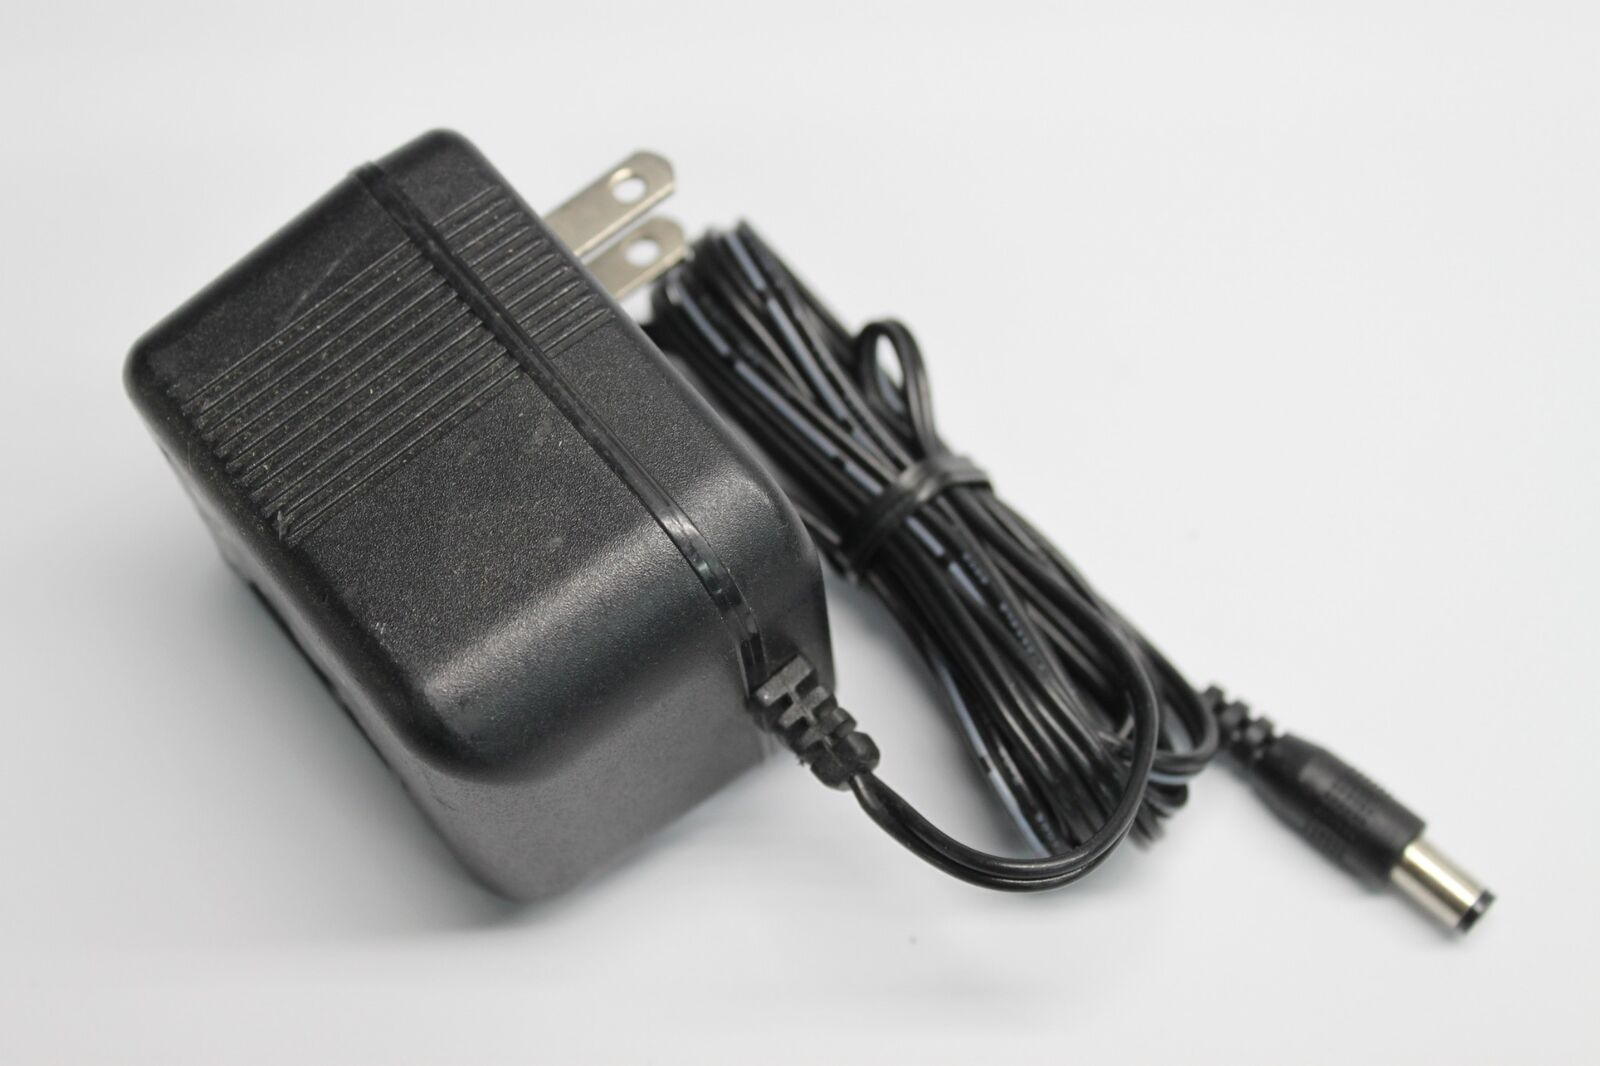 AC Adapter For Yamaha PSR170 PSR-275 Keyboard Wall Charger Power Supply Cord PSU Technical Specifications: Input Voltag